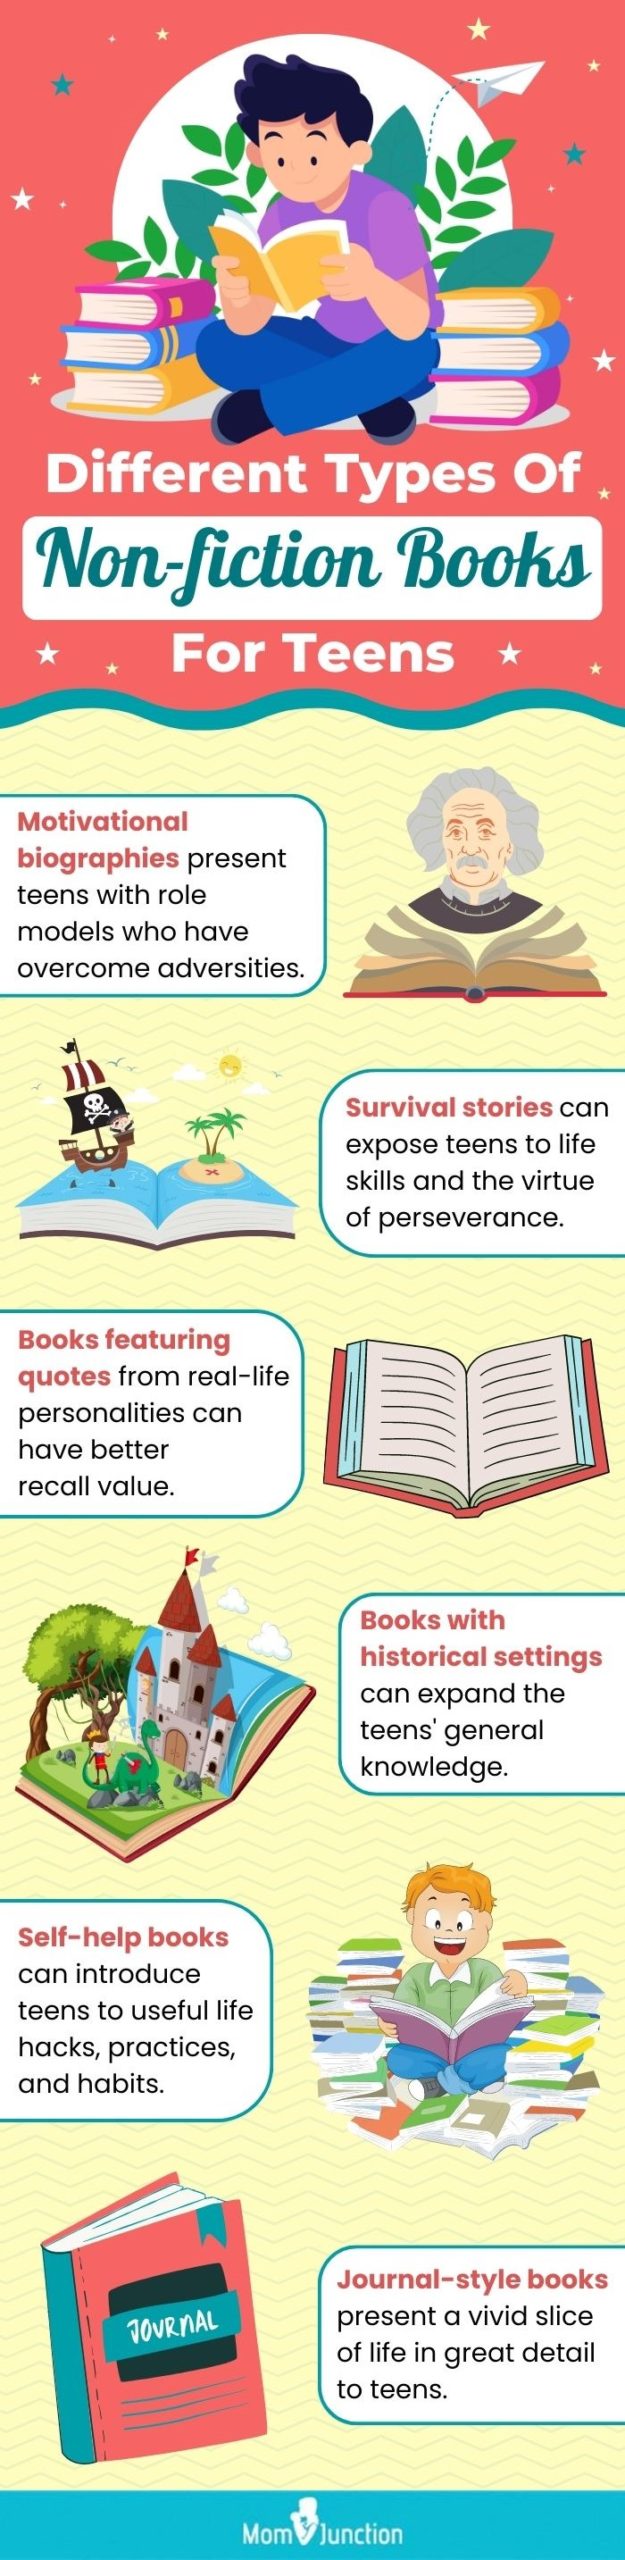 Different Types Of Non-fiction Books For Teens (infographic)